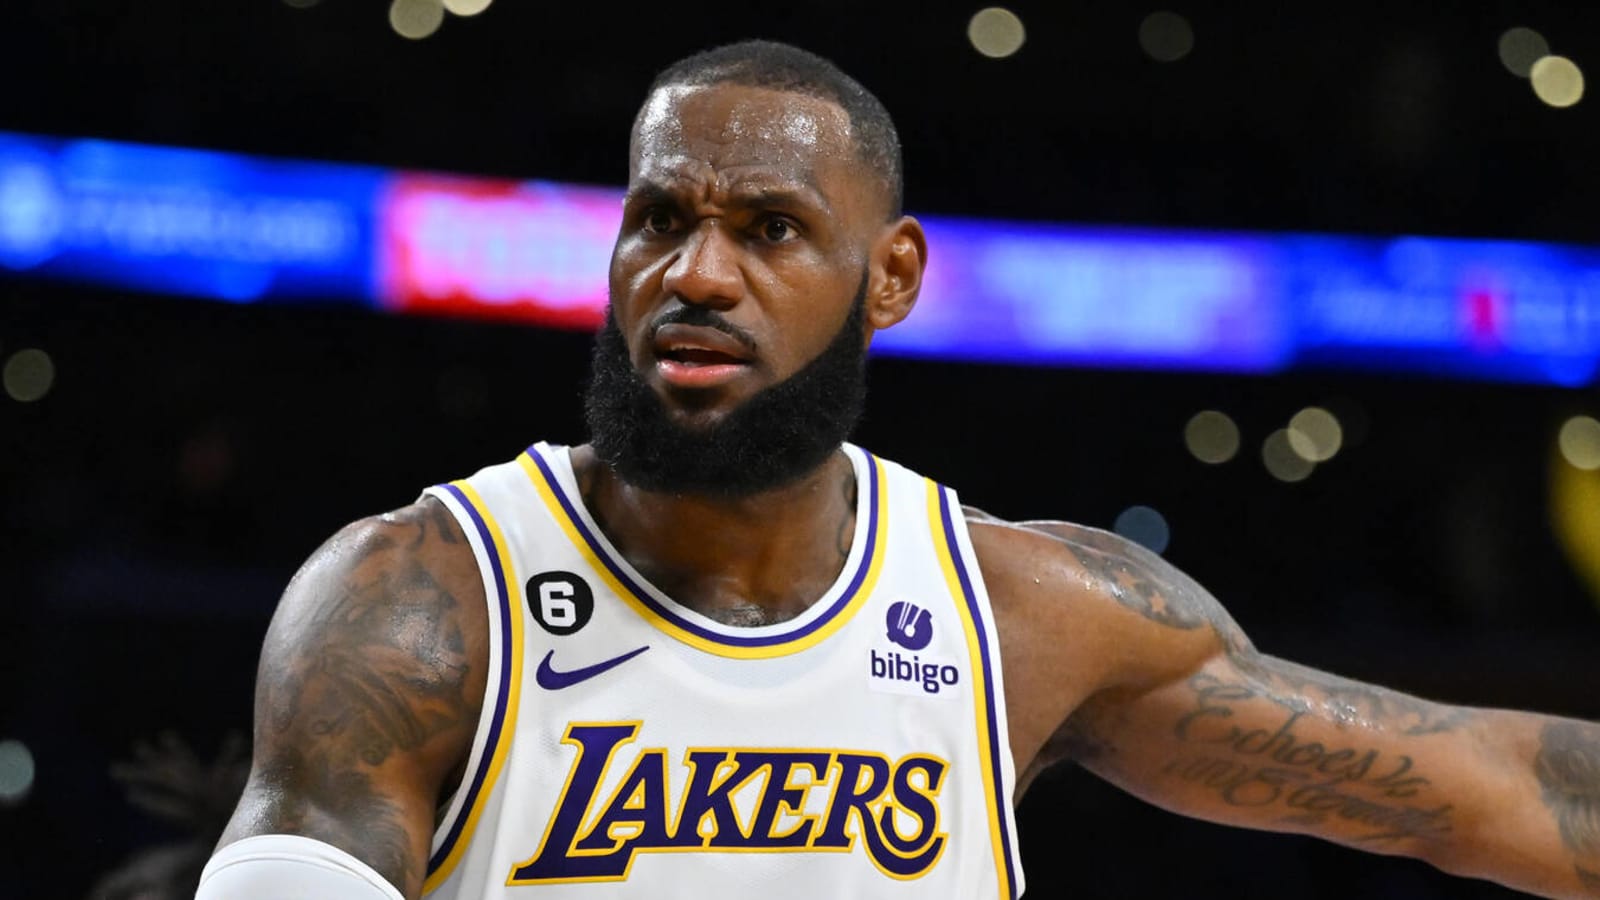 LeBron doesn't want to waste a season but options for change are limited